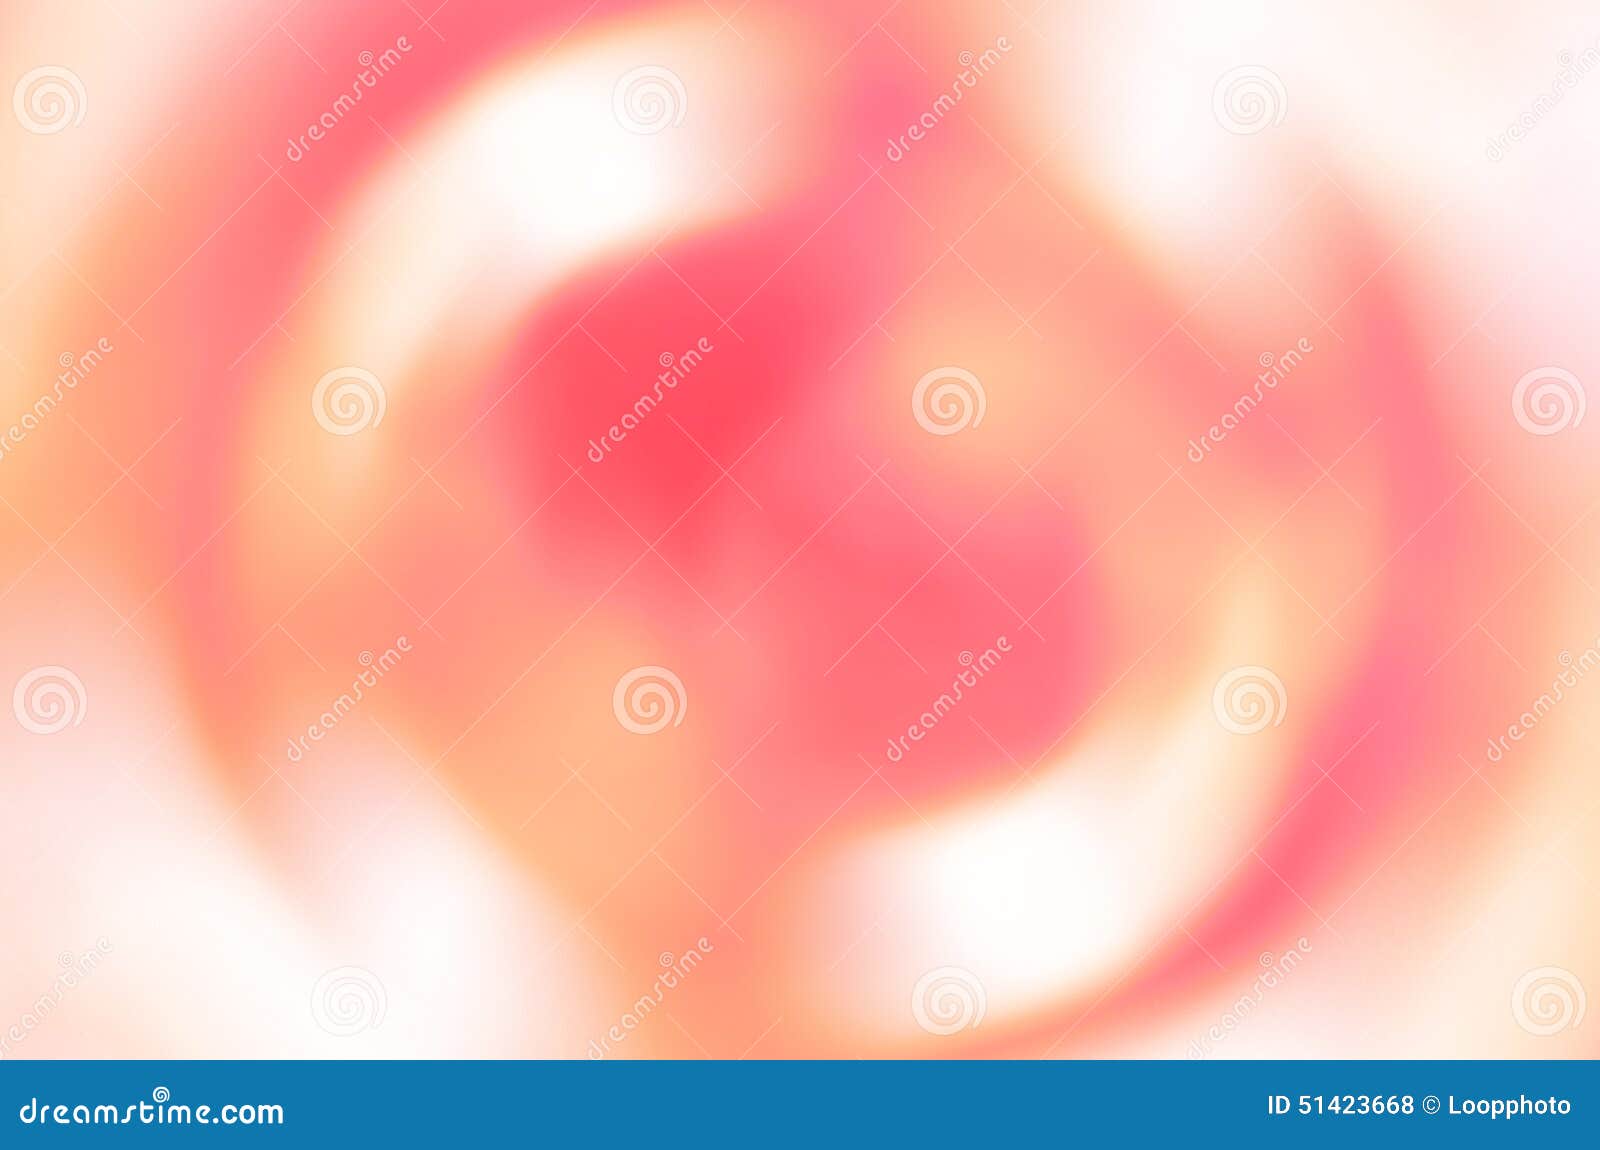 Pink ring light background stock photo. Image of blur - 51423668